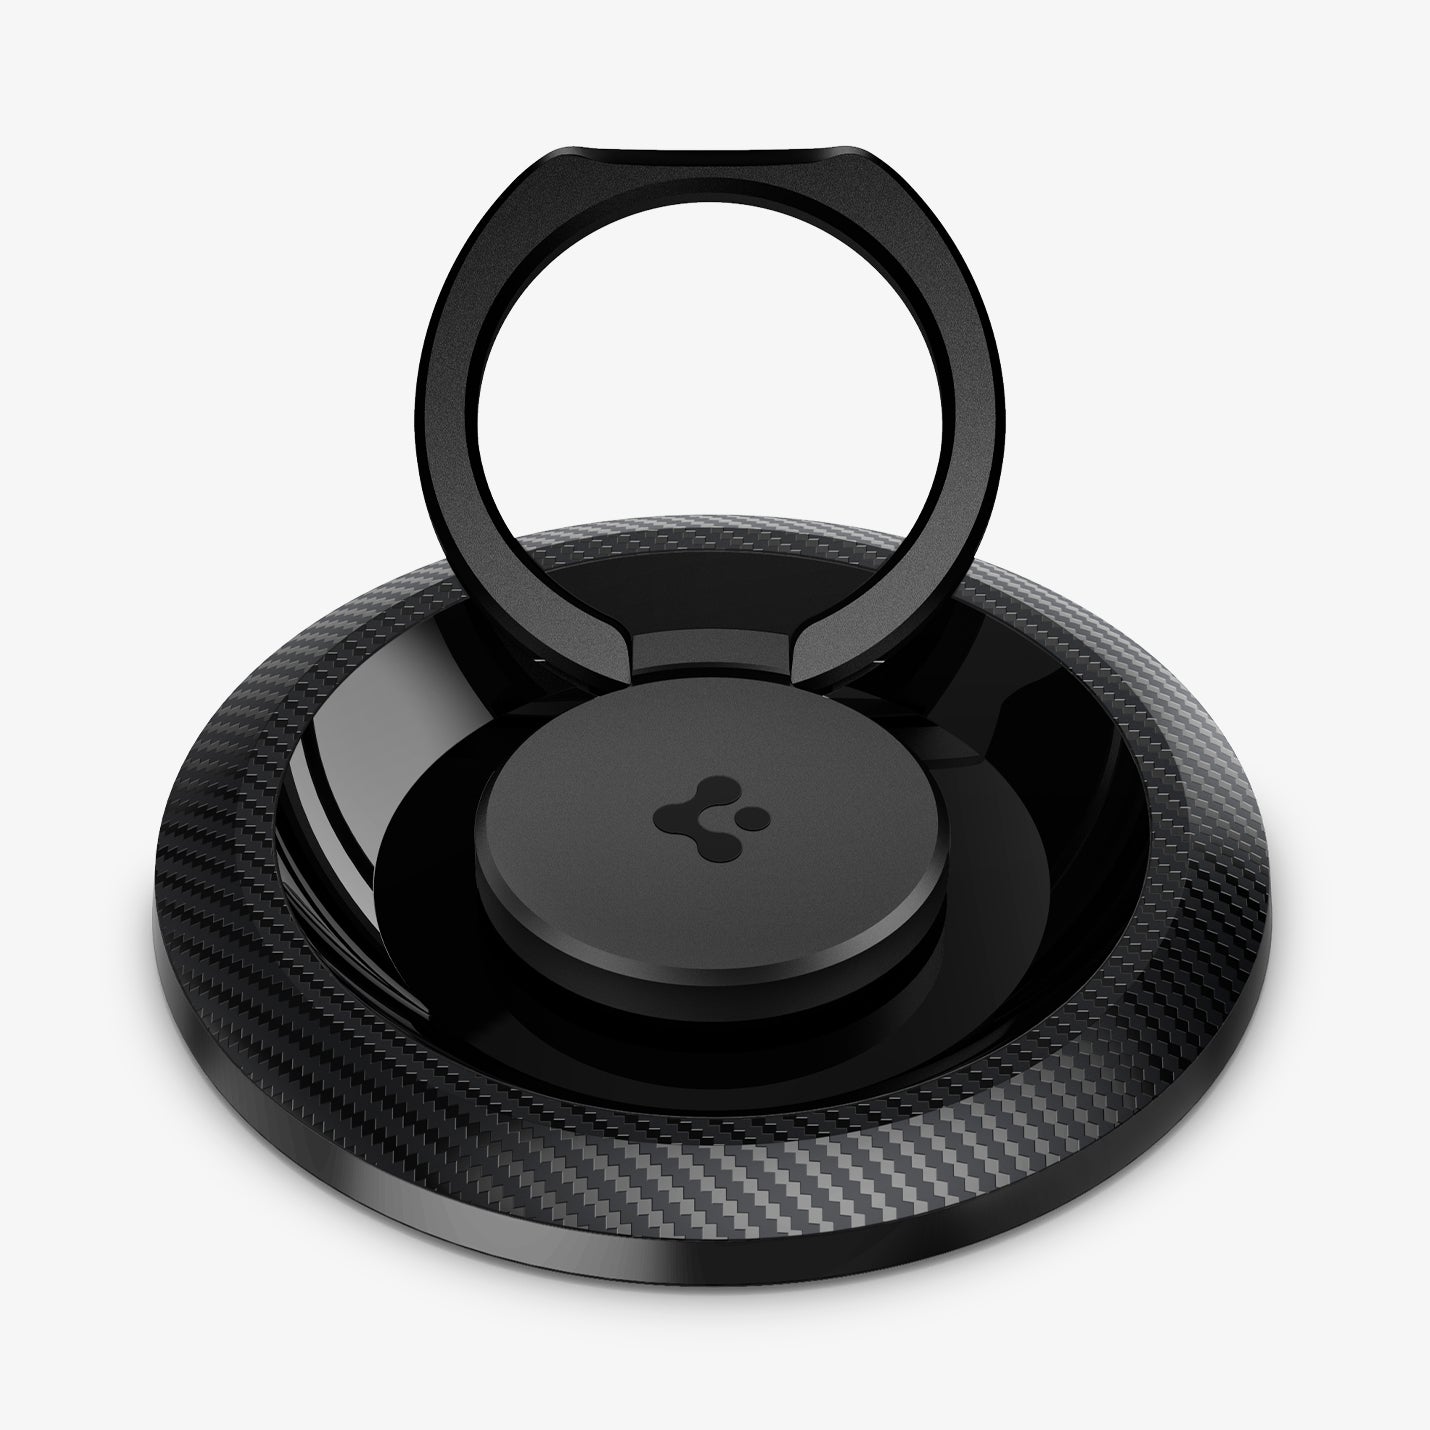 AMP05505 - O-Mag Magnetic Phone Holder (MagFit) in carbon showing the front and ring extended out upwards